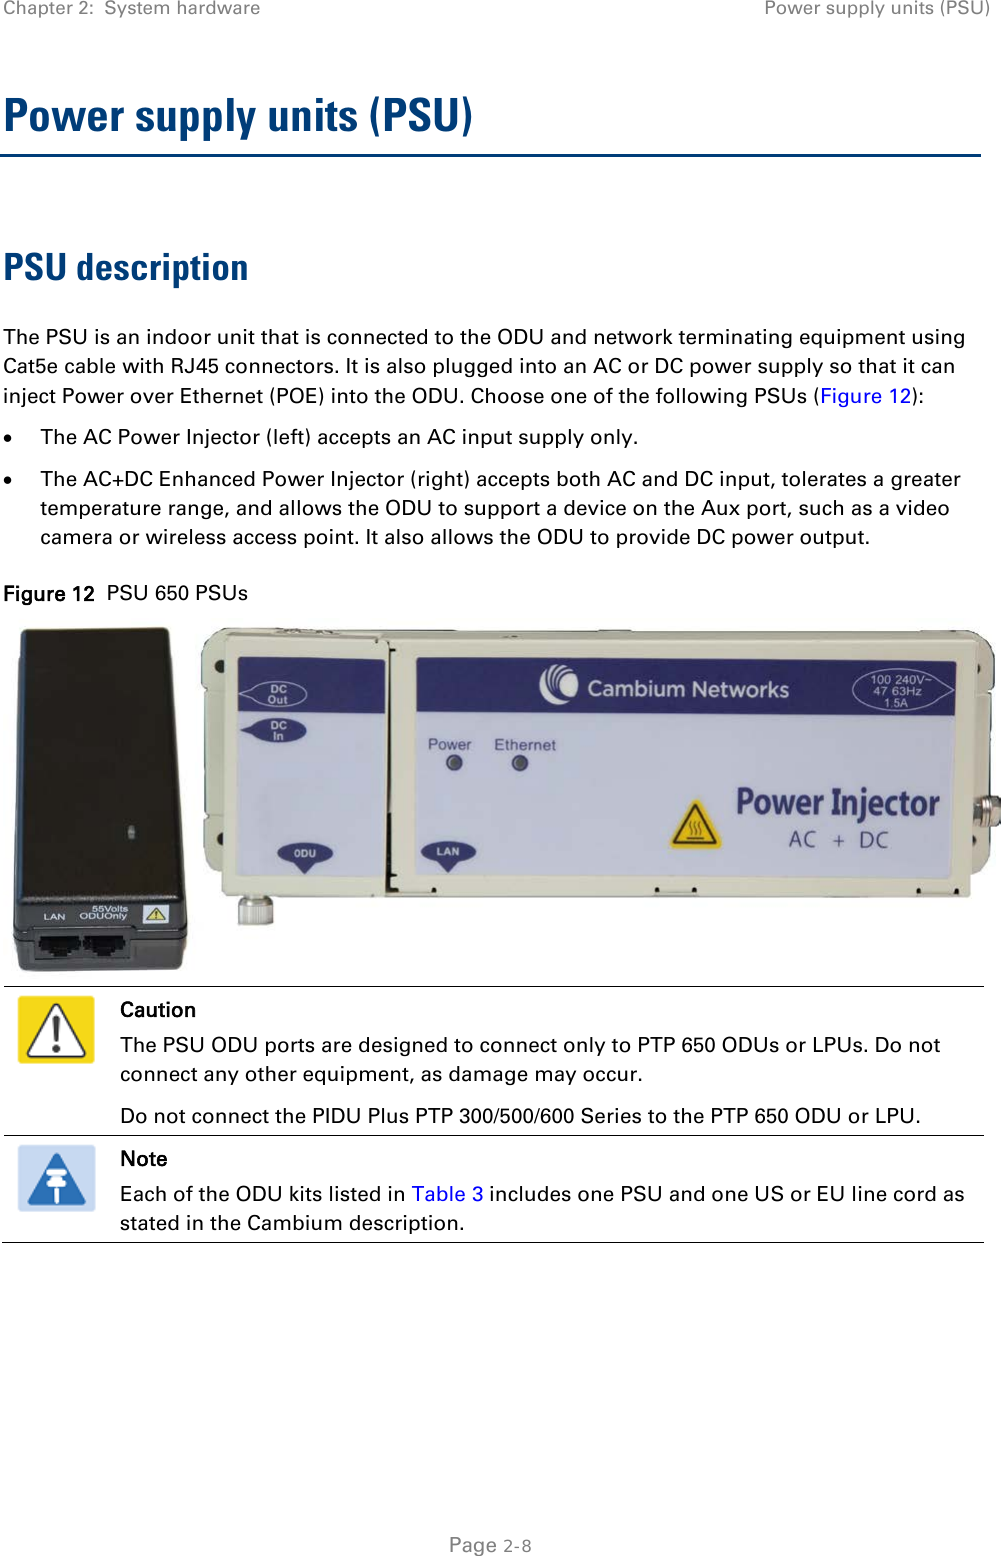 Chapter 2:  System hardware Power supply units (PSU)  Power supply units (PSU) PSU description The PSU is an indoor unit that is connected to the ODU and network terminating equipment using Cat5e cable with RJ45 connectors. It is also plugged into an AC or DC power supply so that it can inject Power over Ethernet (POE) into the ODU. Choose one of the following PSUs (Figure 12): • The AC Power Injector (left) accepts an AC input supply only.  • The AC+DC Enhanced Power Injector (right) accepts both AC and DC input, tolerates a greater temperature range, and allows the ODU to support a device on the Aux port, such as a video camera or wireless access point. It also allows the ODU to provide DC power output. Figure 12  PSU 650 PSUs   Caution The PSU ODU ports are designed to connect only to PTP 650 ODUs or LPUs. Do not connect any other equipment, as damage may occur. Do not connect the PIDU Plus PTP 300/500/600 Series to the PTP 650 ODU or LPU.  Note Each of the ODU kits listed in Table 3 includes one PSU and one US or EU line cord as stated in the Cambium description.   Page 2-8 